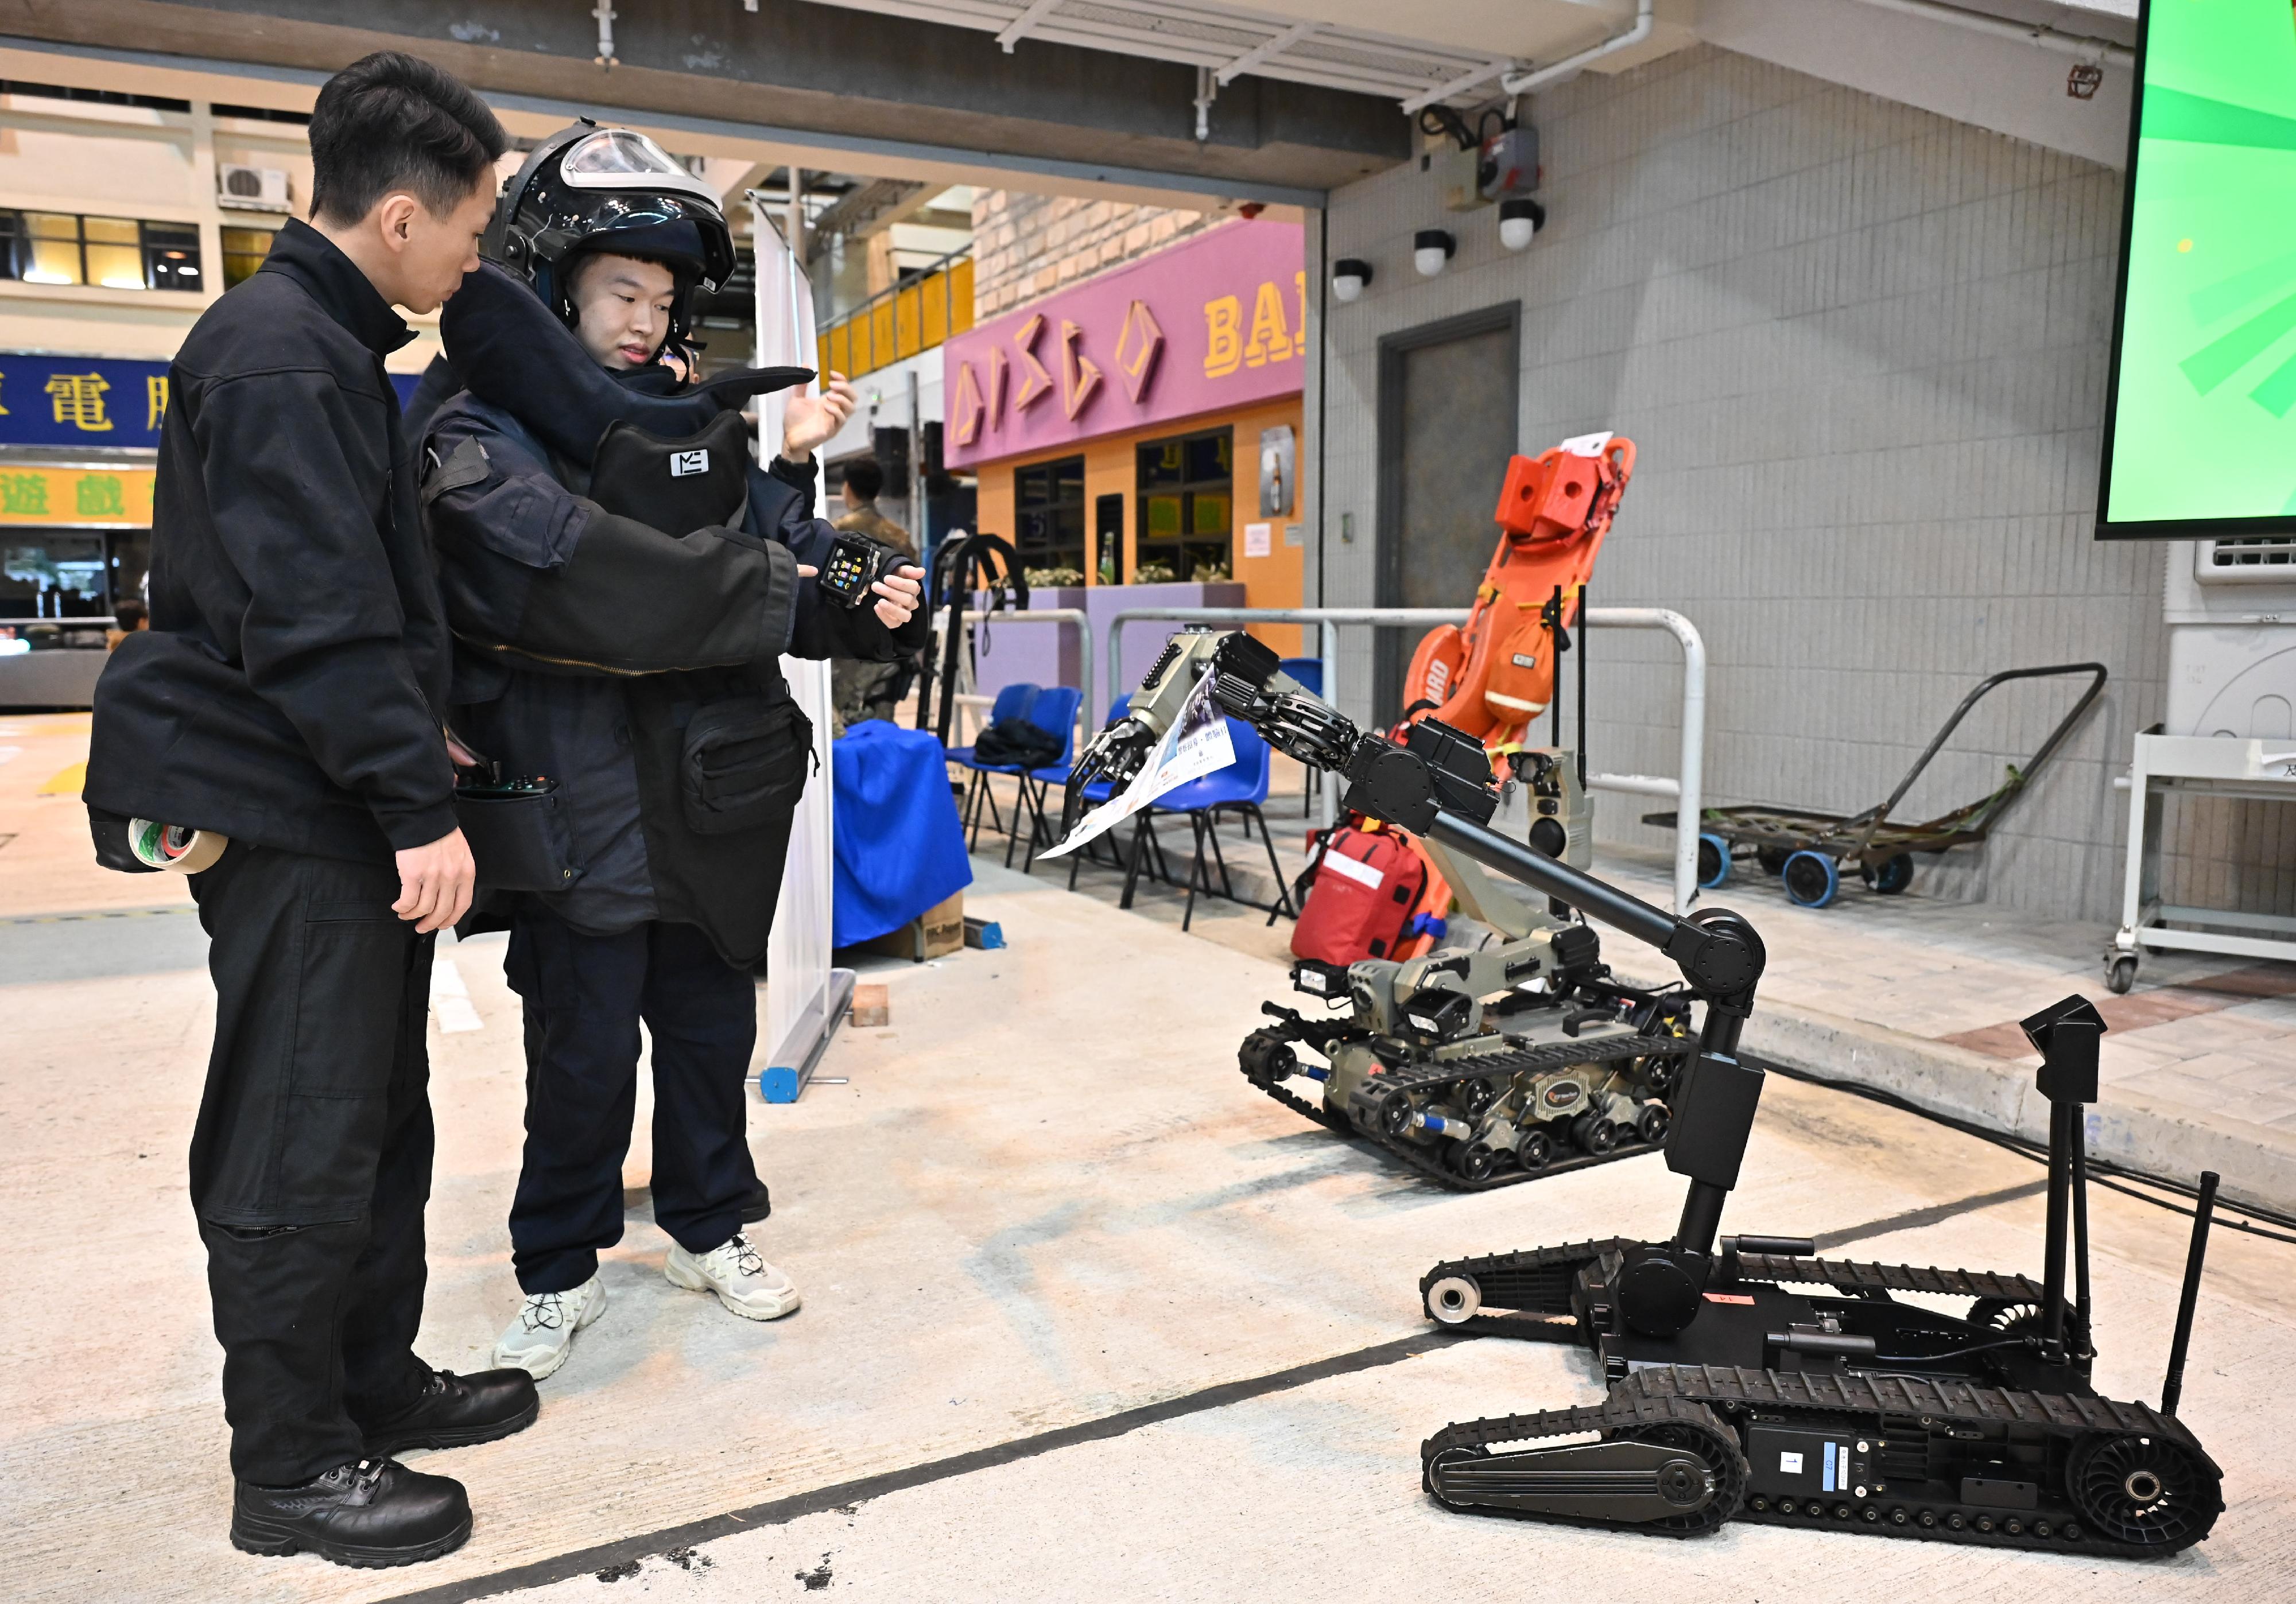 The Hong Kong Police Force today (December 17) held the Police Recruitment Experience and Assessment Day at the Hong Kong Police College. Photo shows an officer from the Explosive Ordnance Disposal Bureau introducing their work and equipment to a participant.